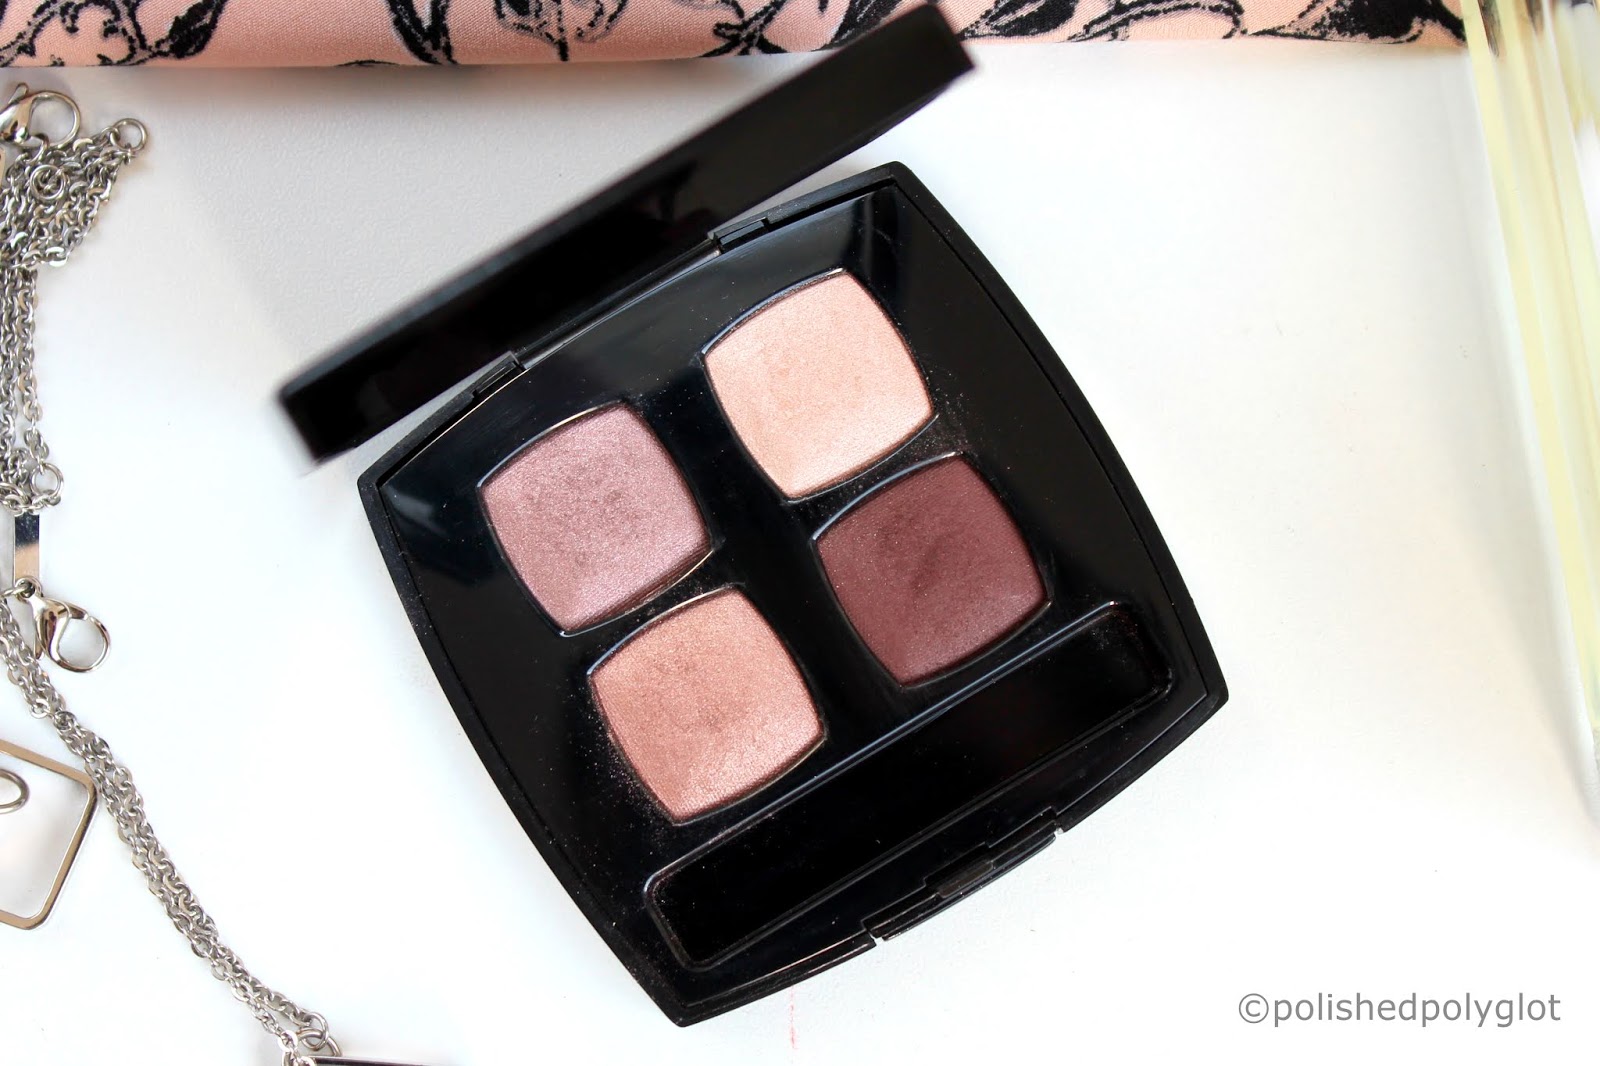 nars – Stay Gorgeous!